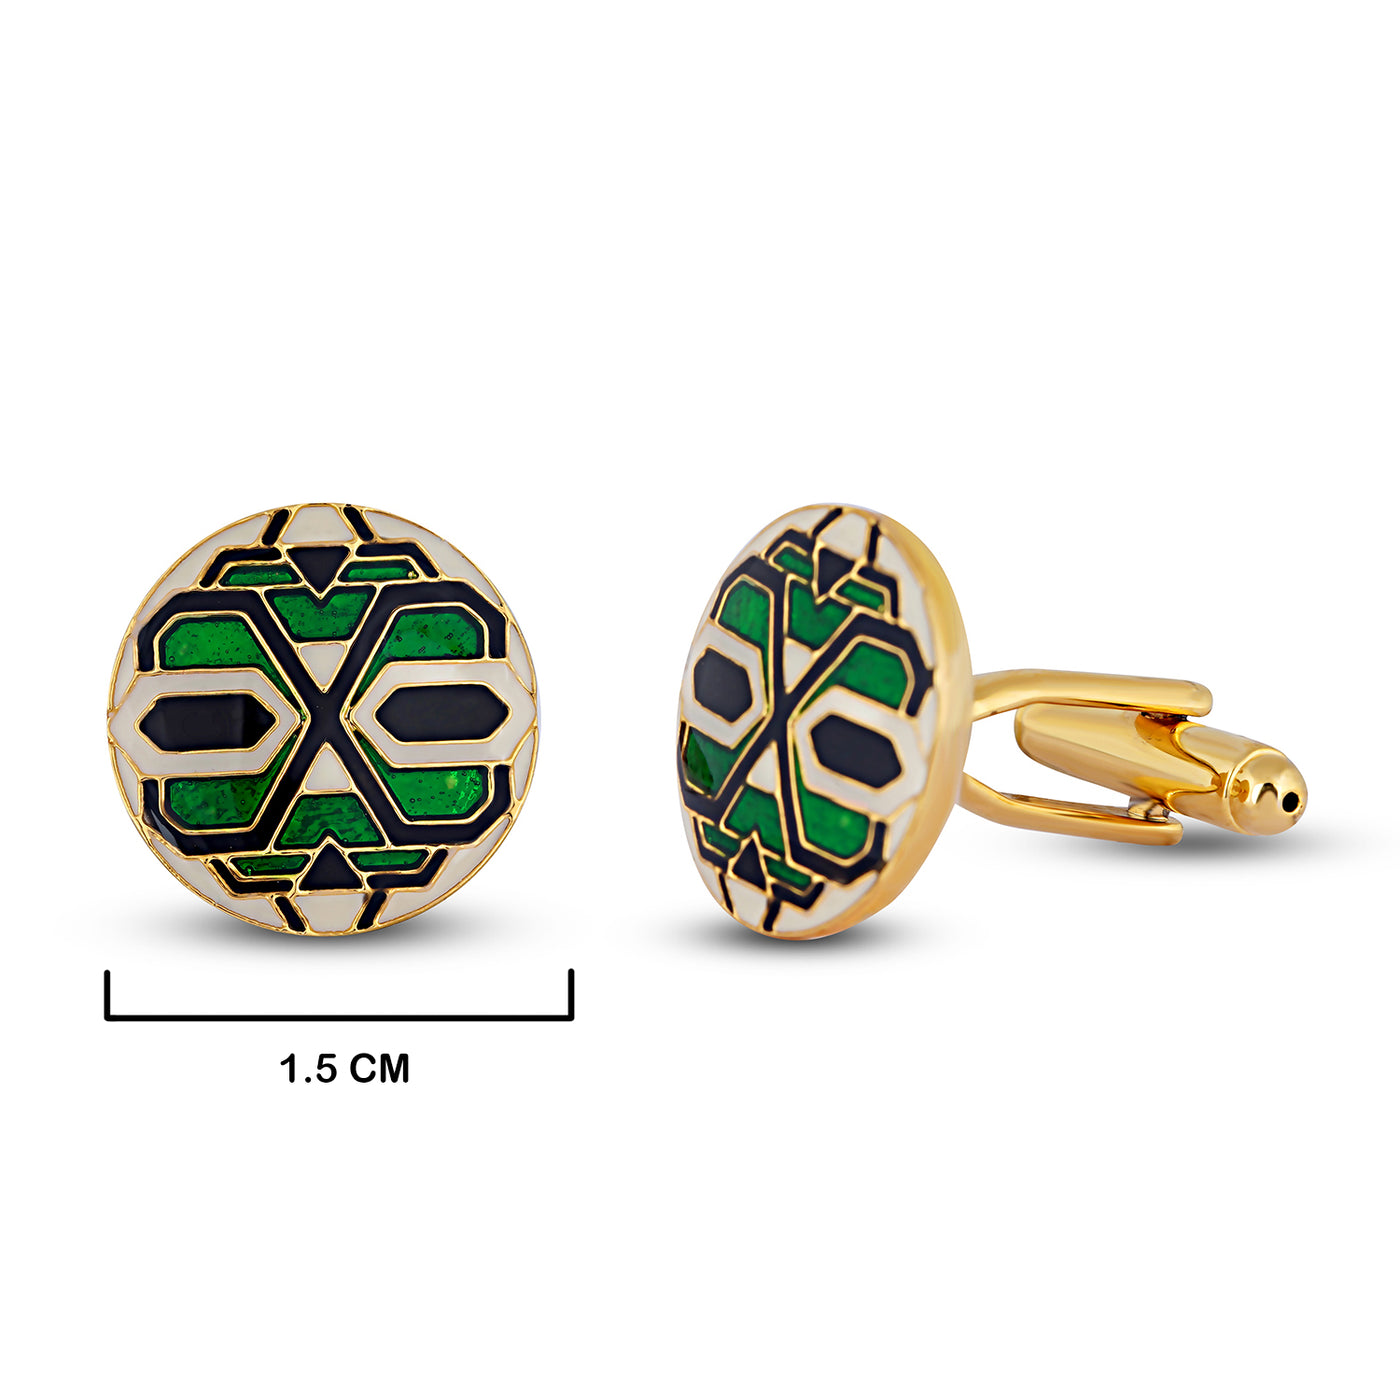 Green and Black Kundan Cufflinks with measurements in cm. 1.5cm.